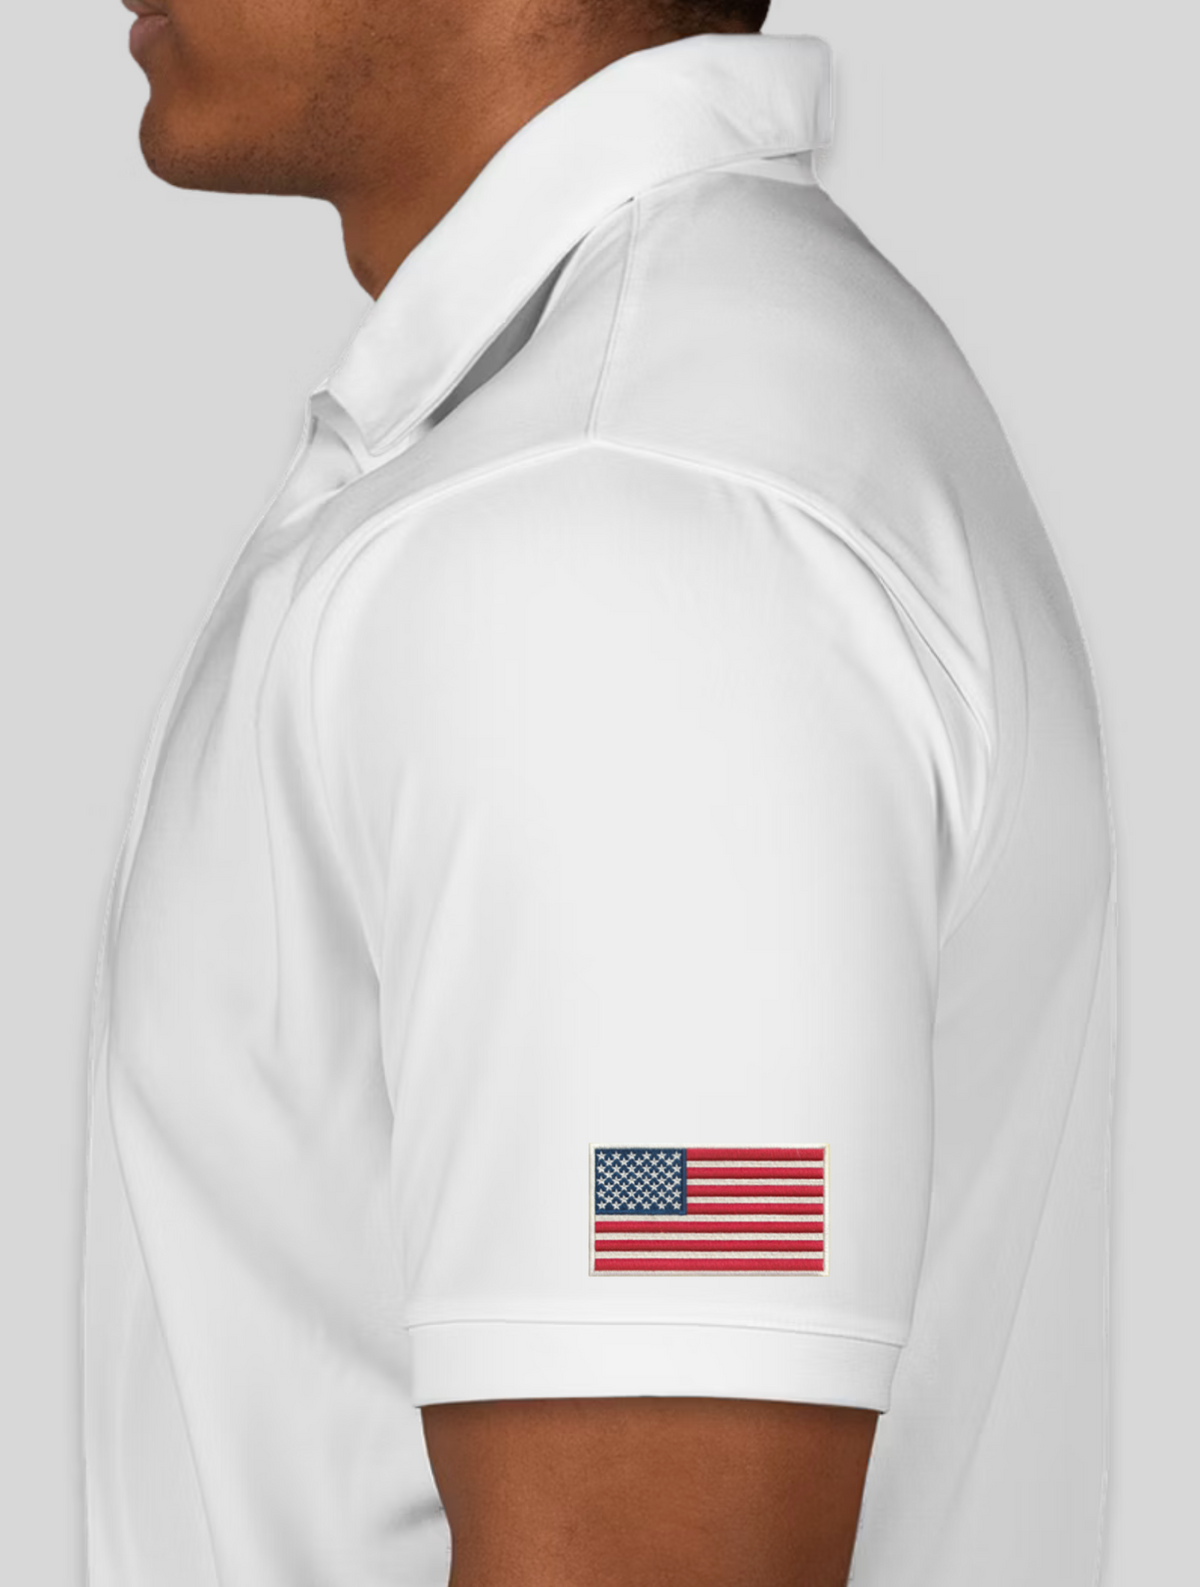 LIMITED EDITION! Clique Spin Polo - Full Color Emblem + USA Flag